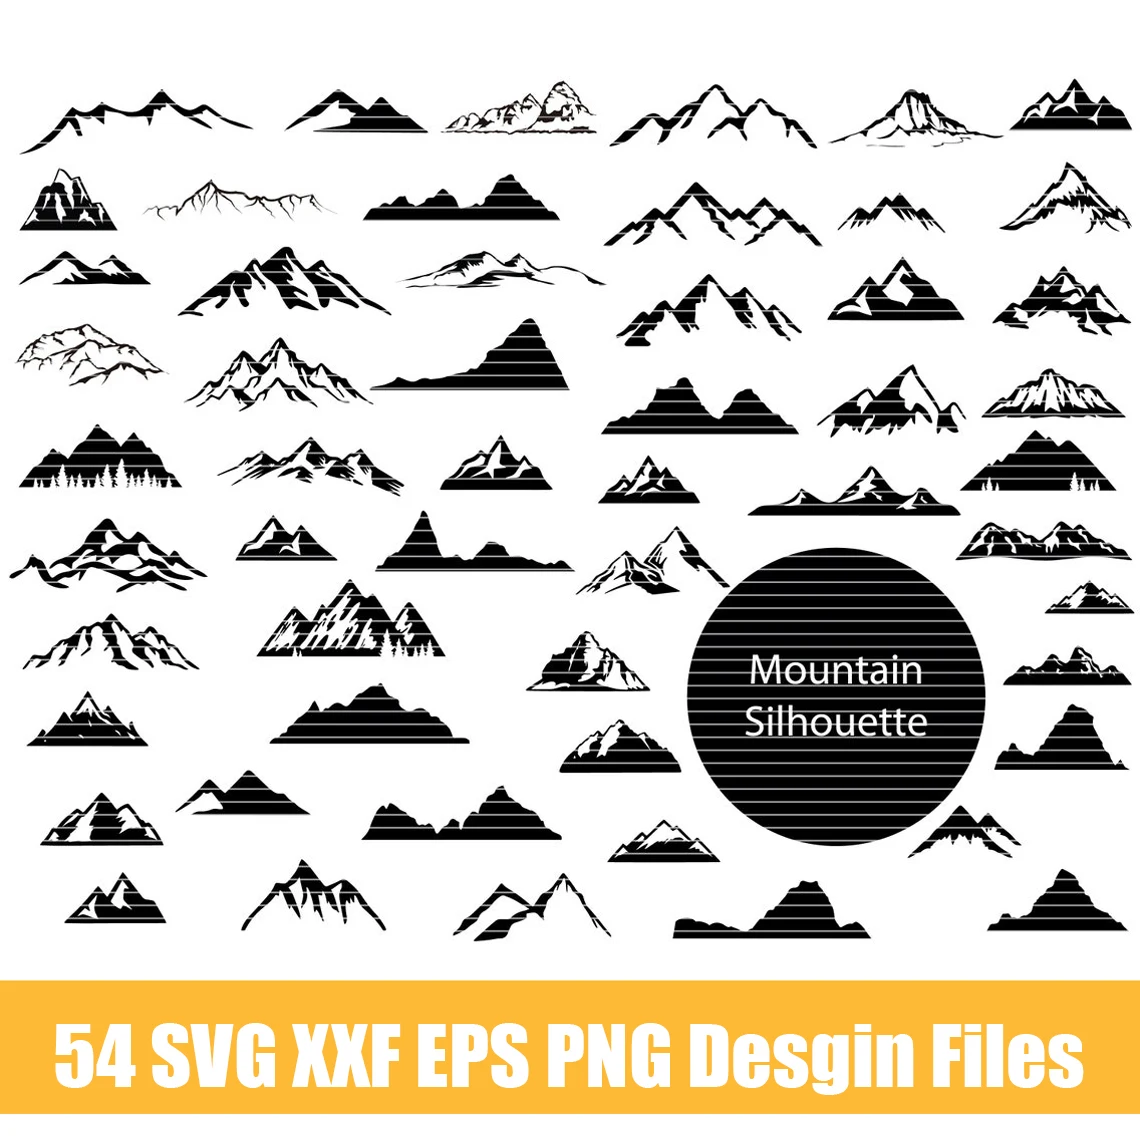 54 Mountain Template Bundle Laser Cut Vector SVG DXF EPS PNG Files for CNC Laser/Plasma Cutting Printing wood pellet machine for sale